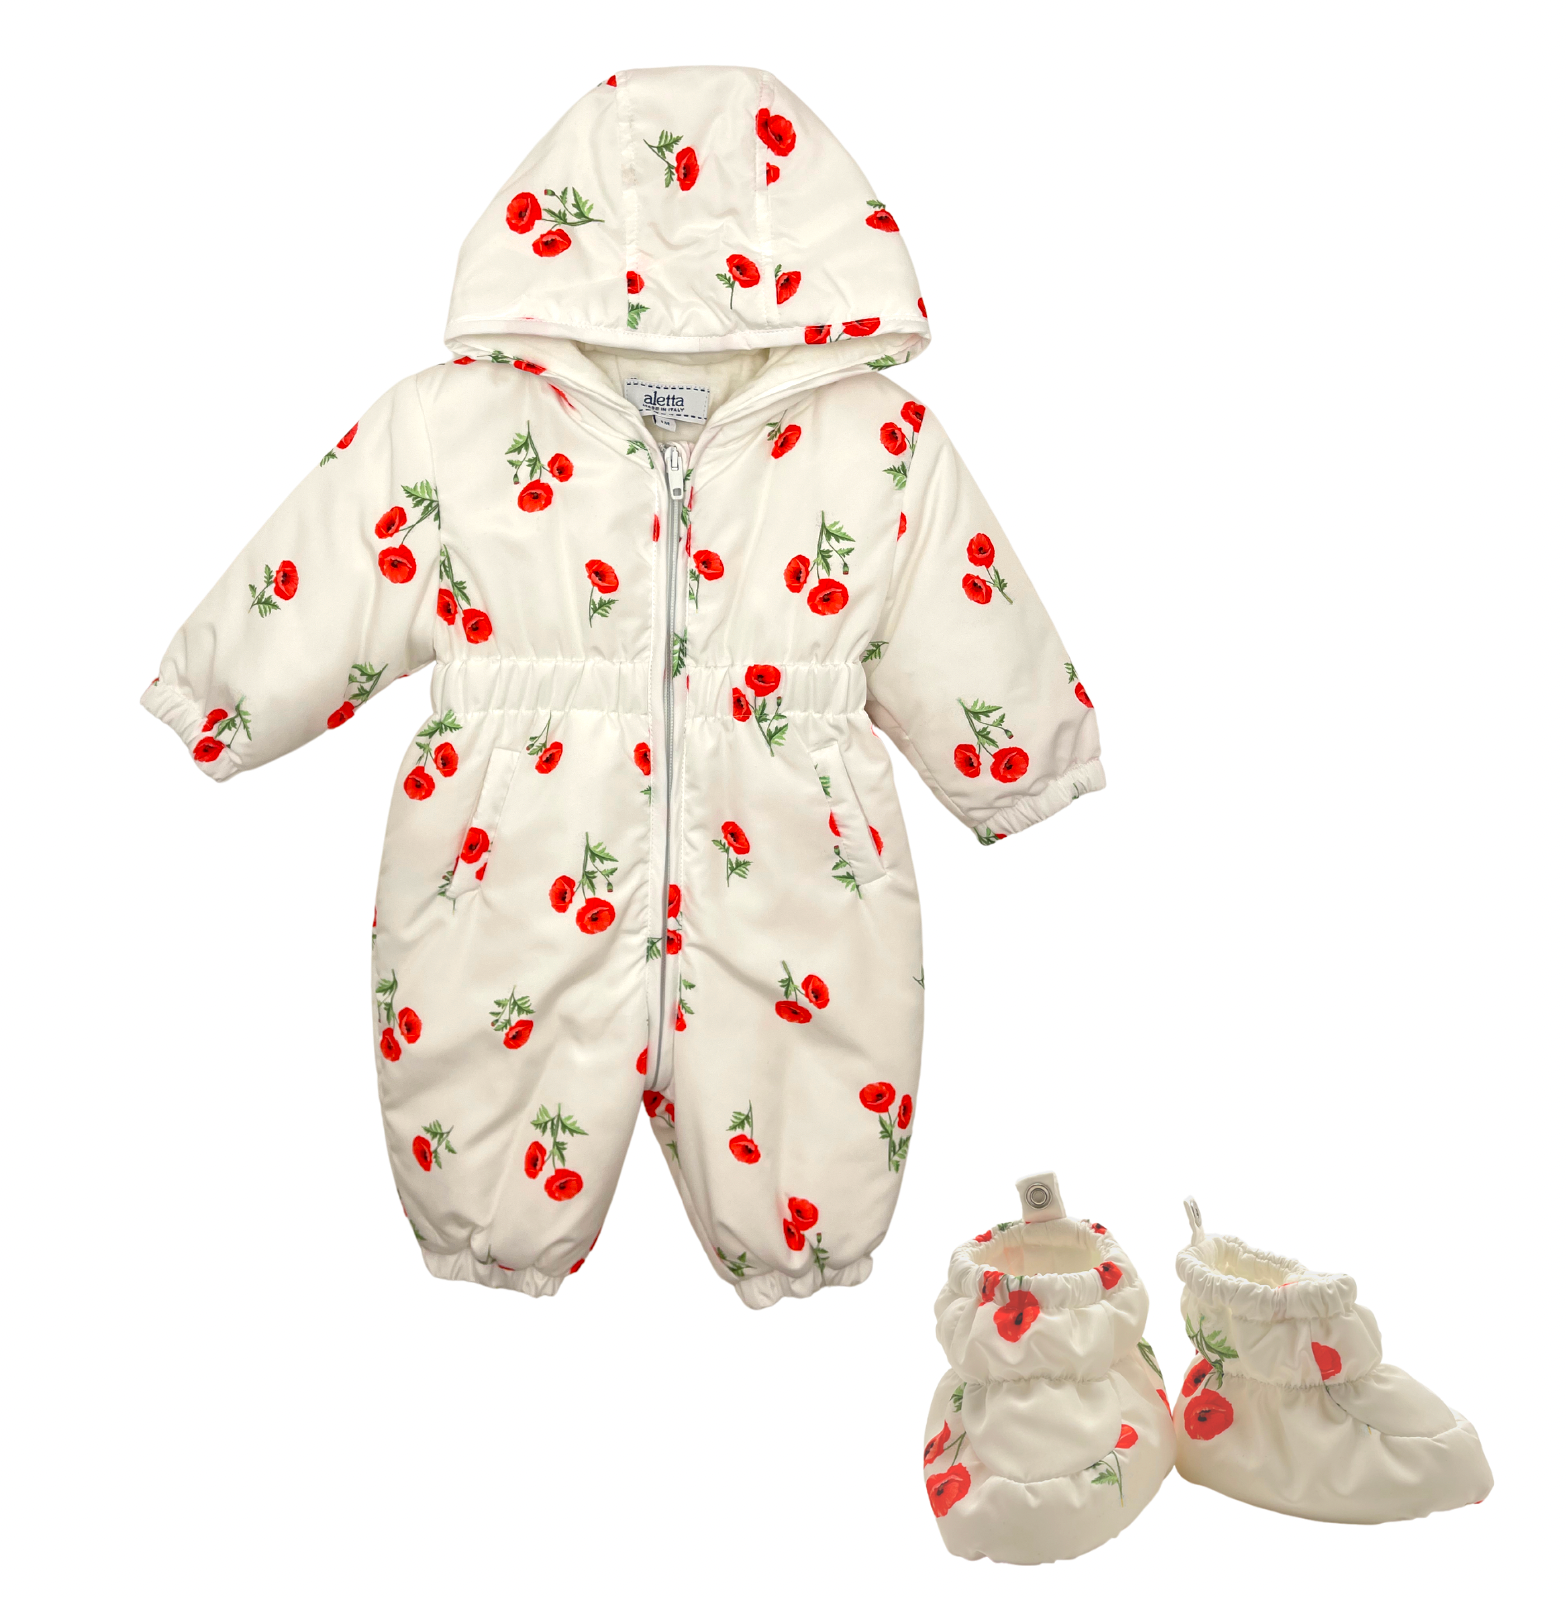 ALETTA - White floral jumpsuit - 1 month old